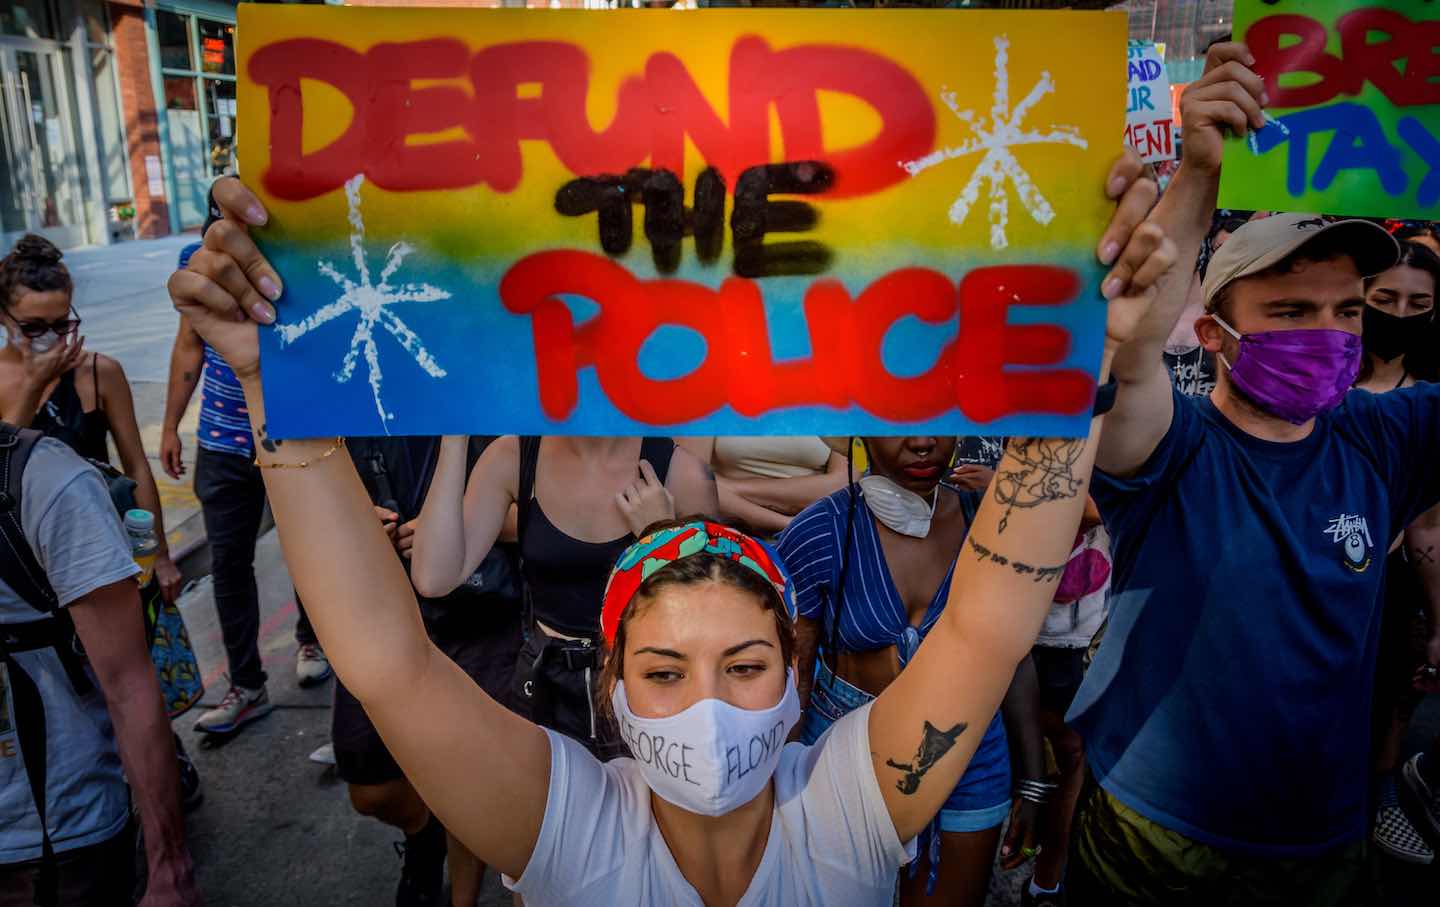 A participant holding a “Defund the Police” sign at a protest